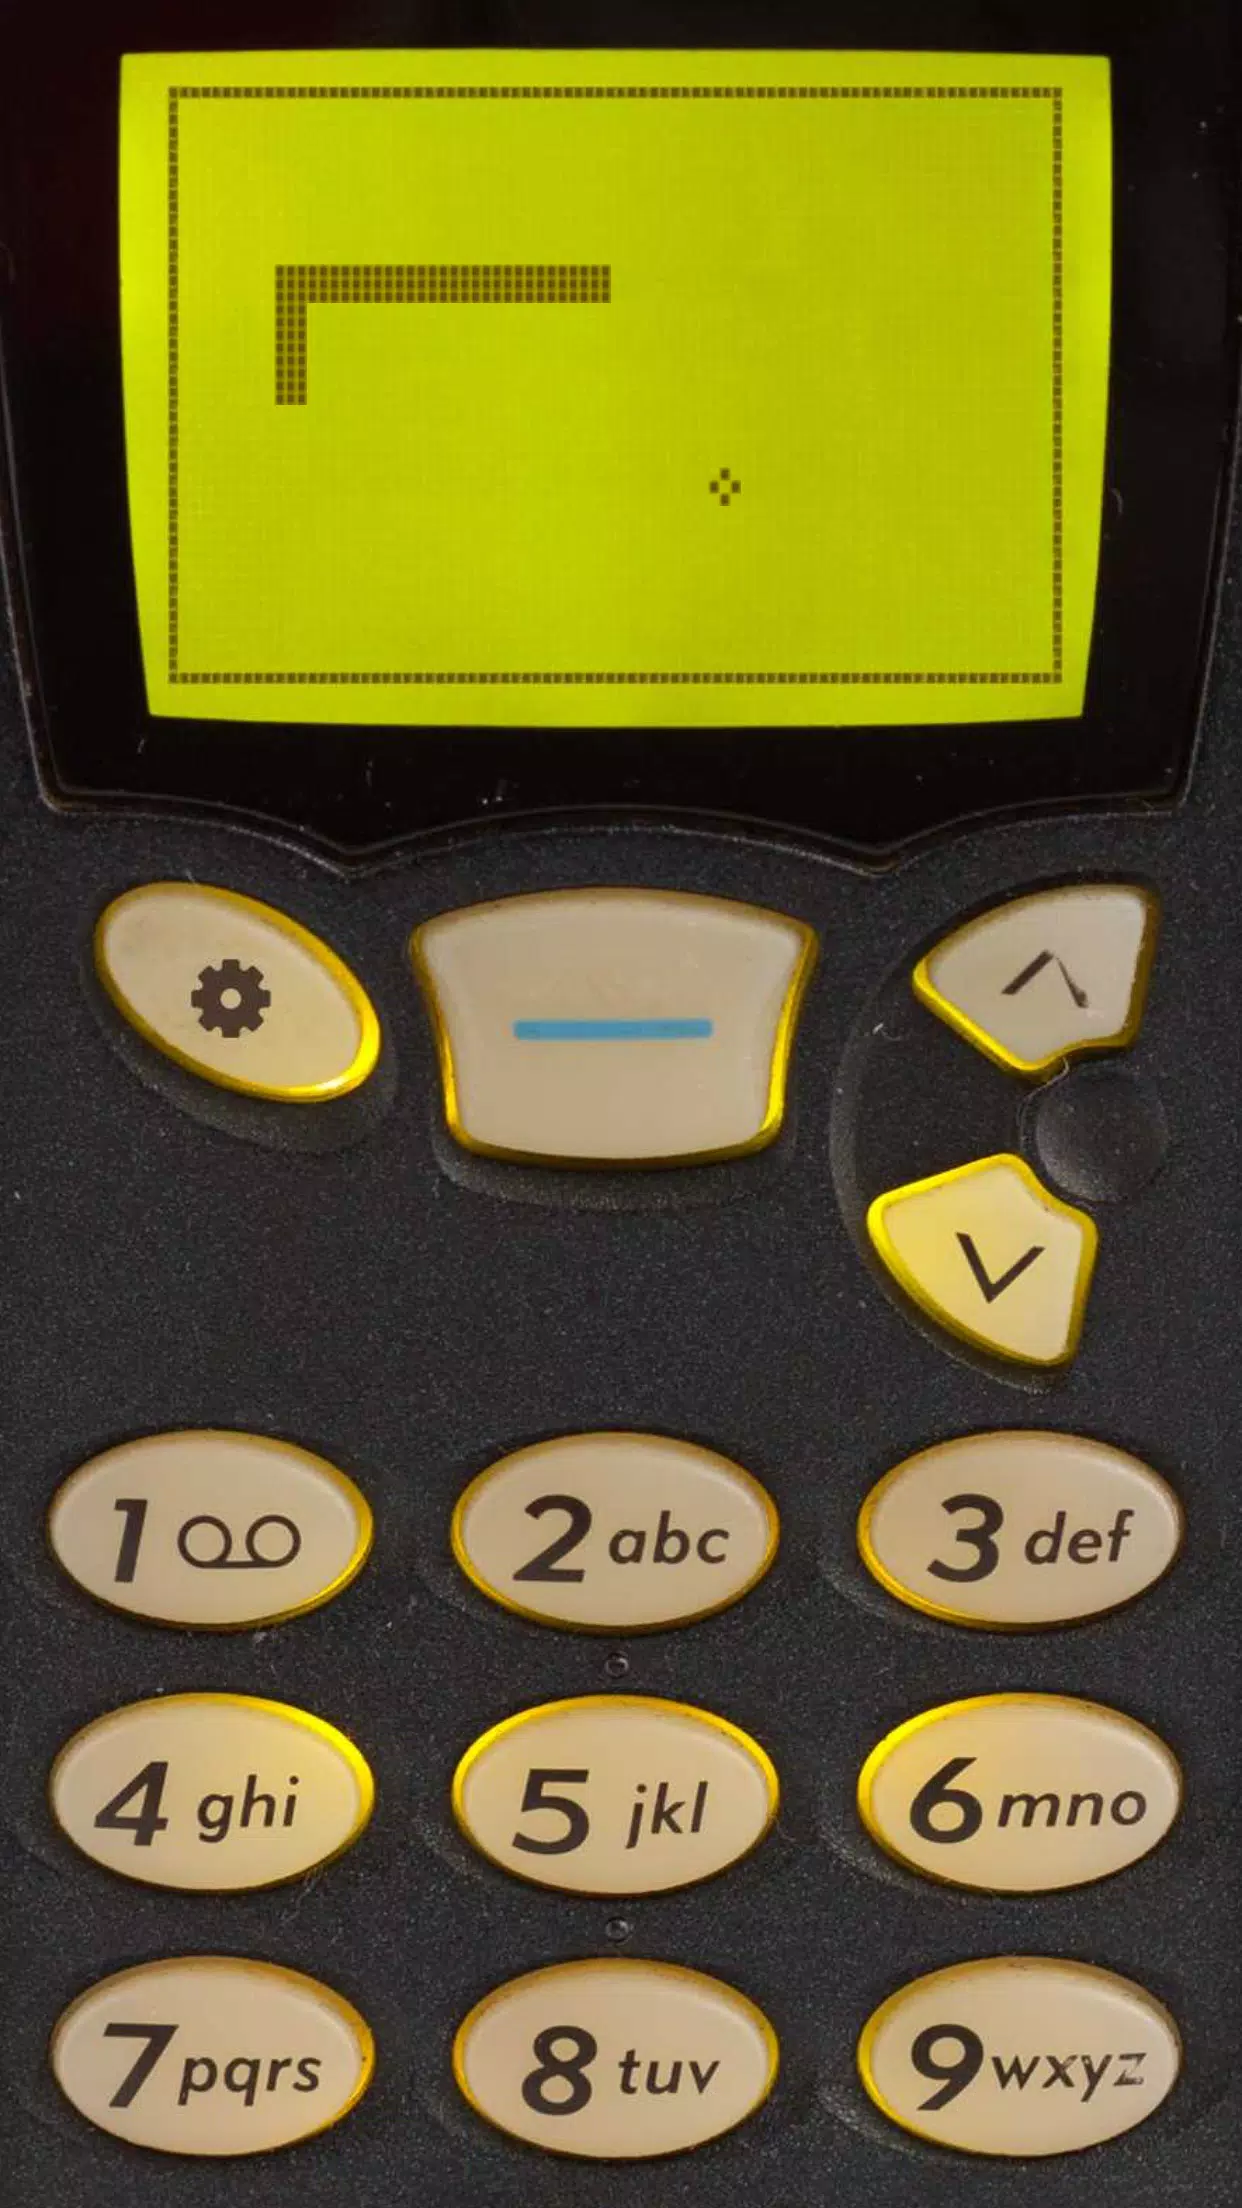 Classic Snake - Nokia 97 Old - Download do APK para Android